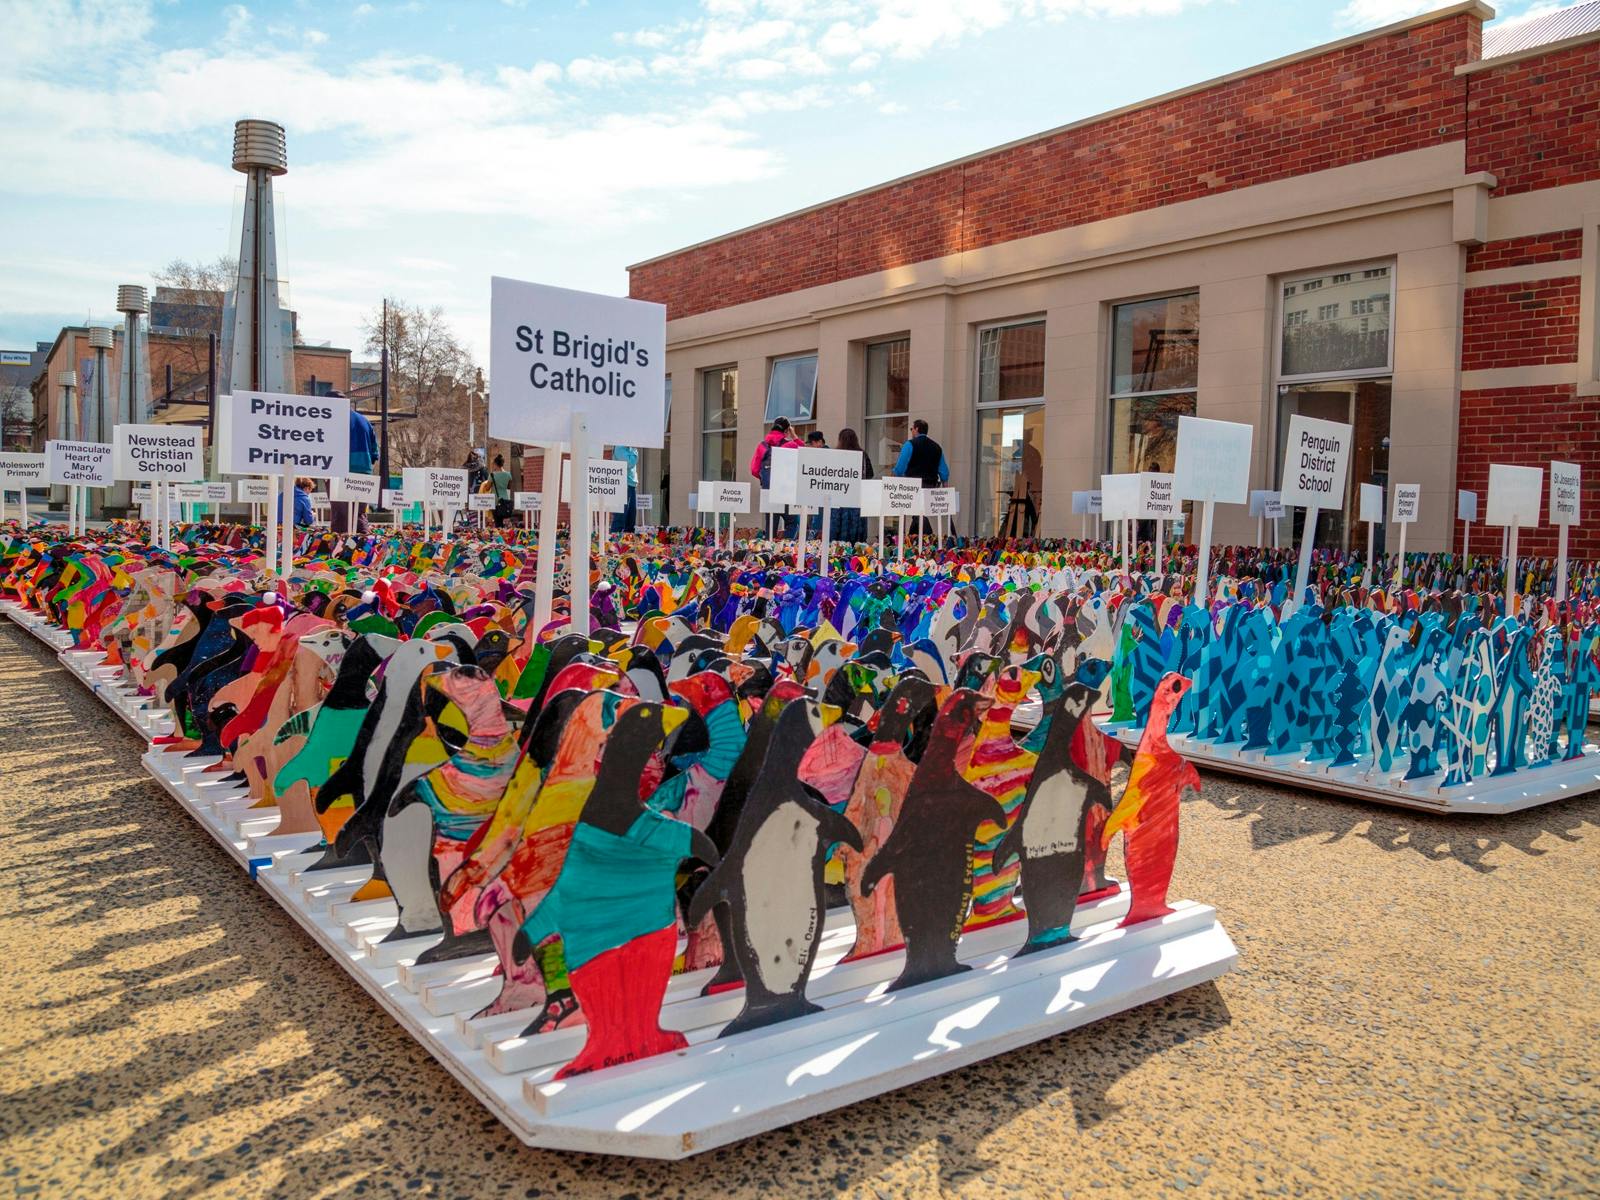 A colourful cluster of penguins provided by school children from across the country.